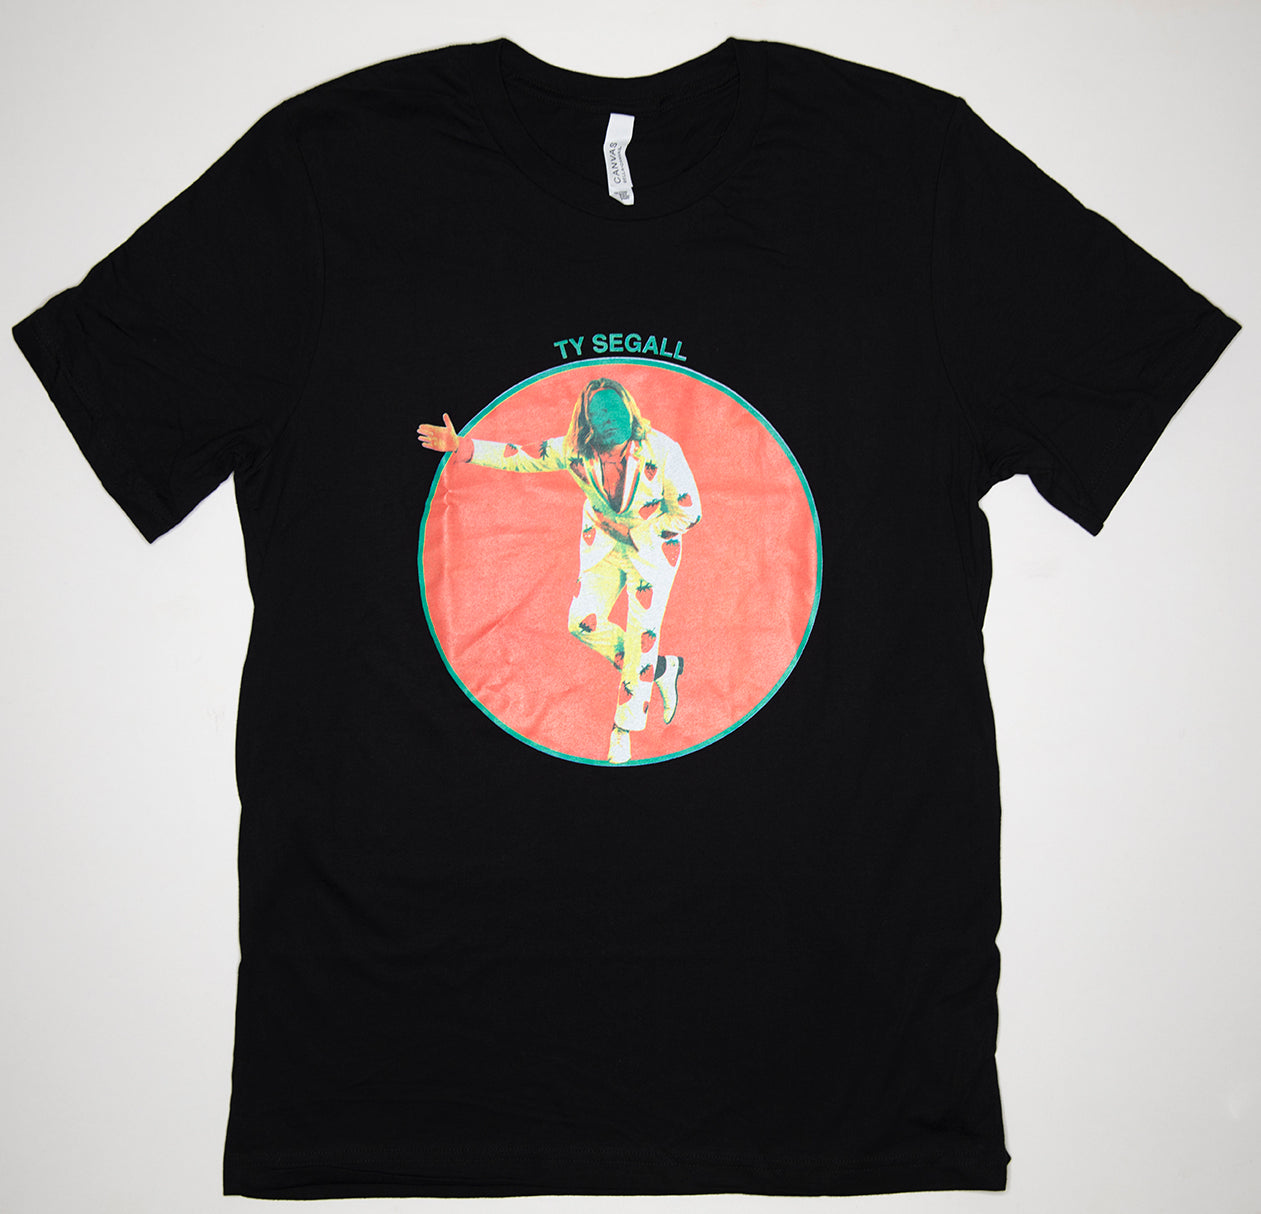 Ty Segall - First Taste / Strawberry Man First Taste Tour Shirt Size Large